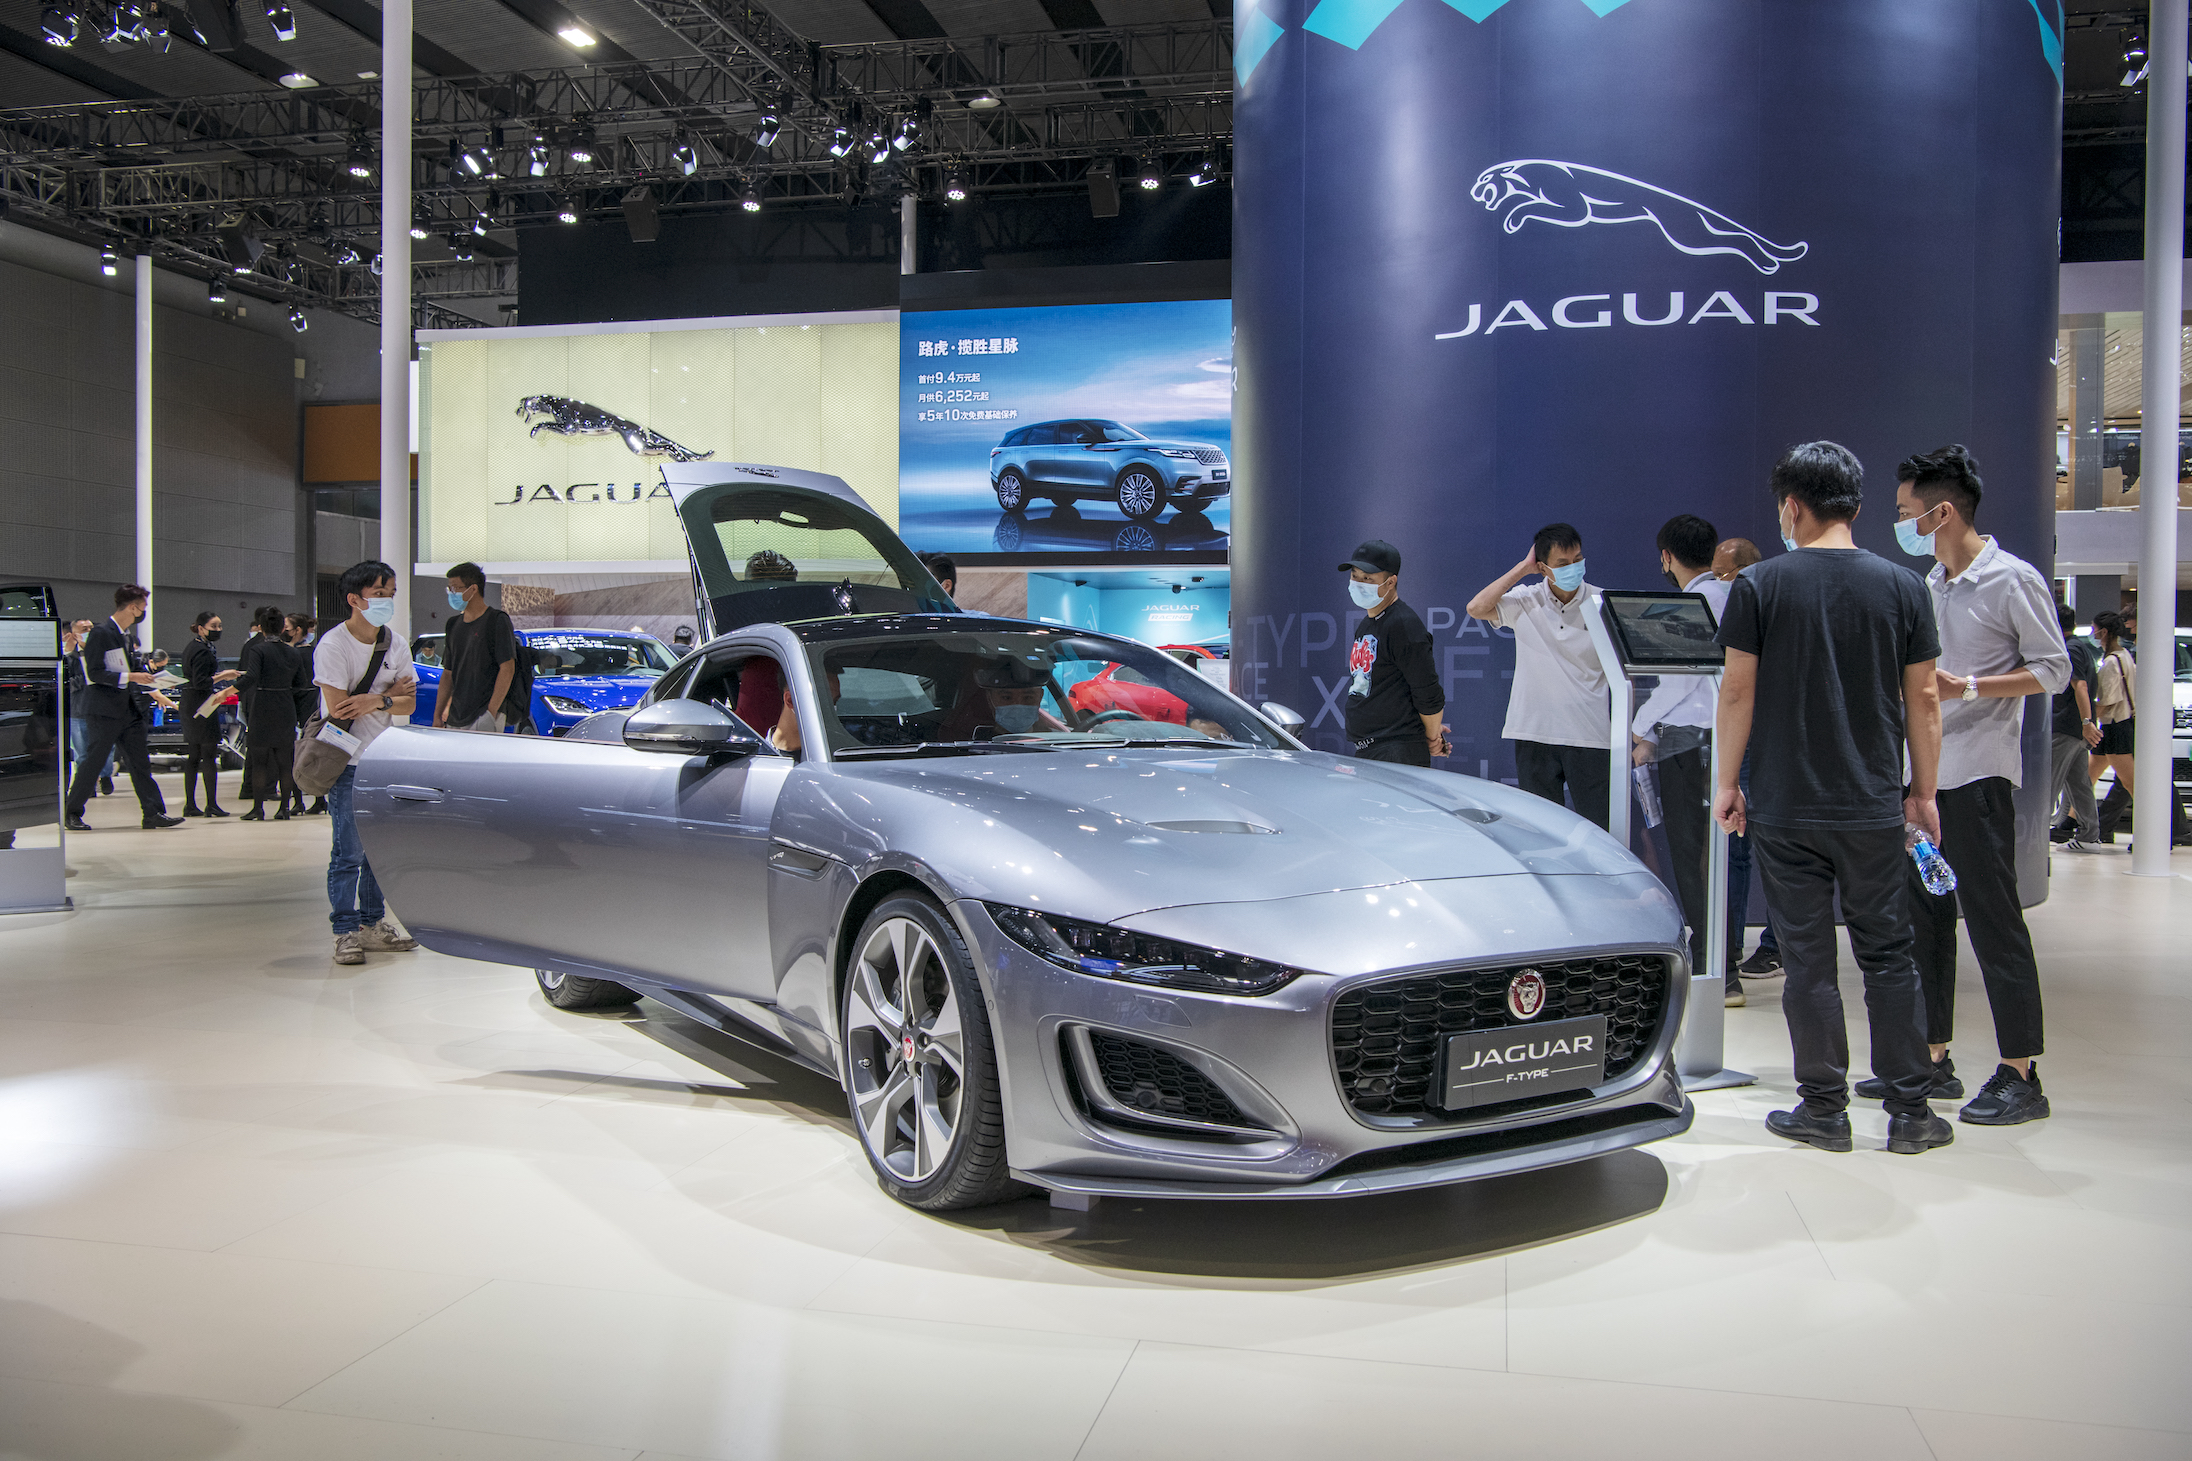 A Jaguar F-TYPE sports car is on display during the 18th Guangzhou International Automobile Exhibition